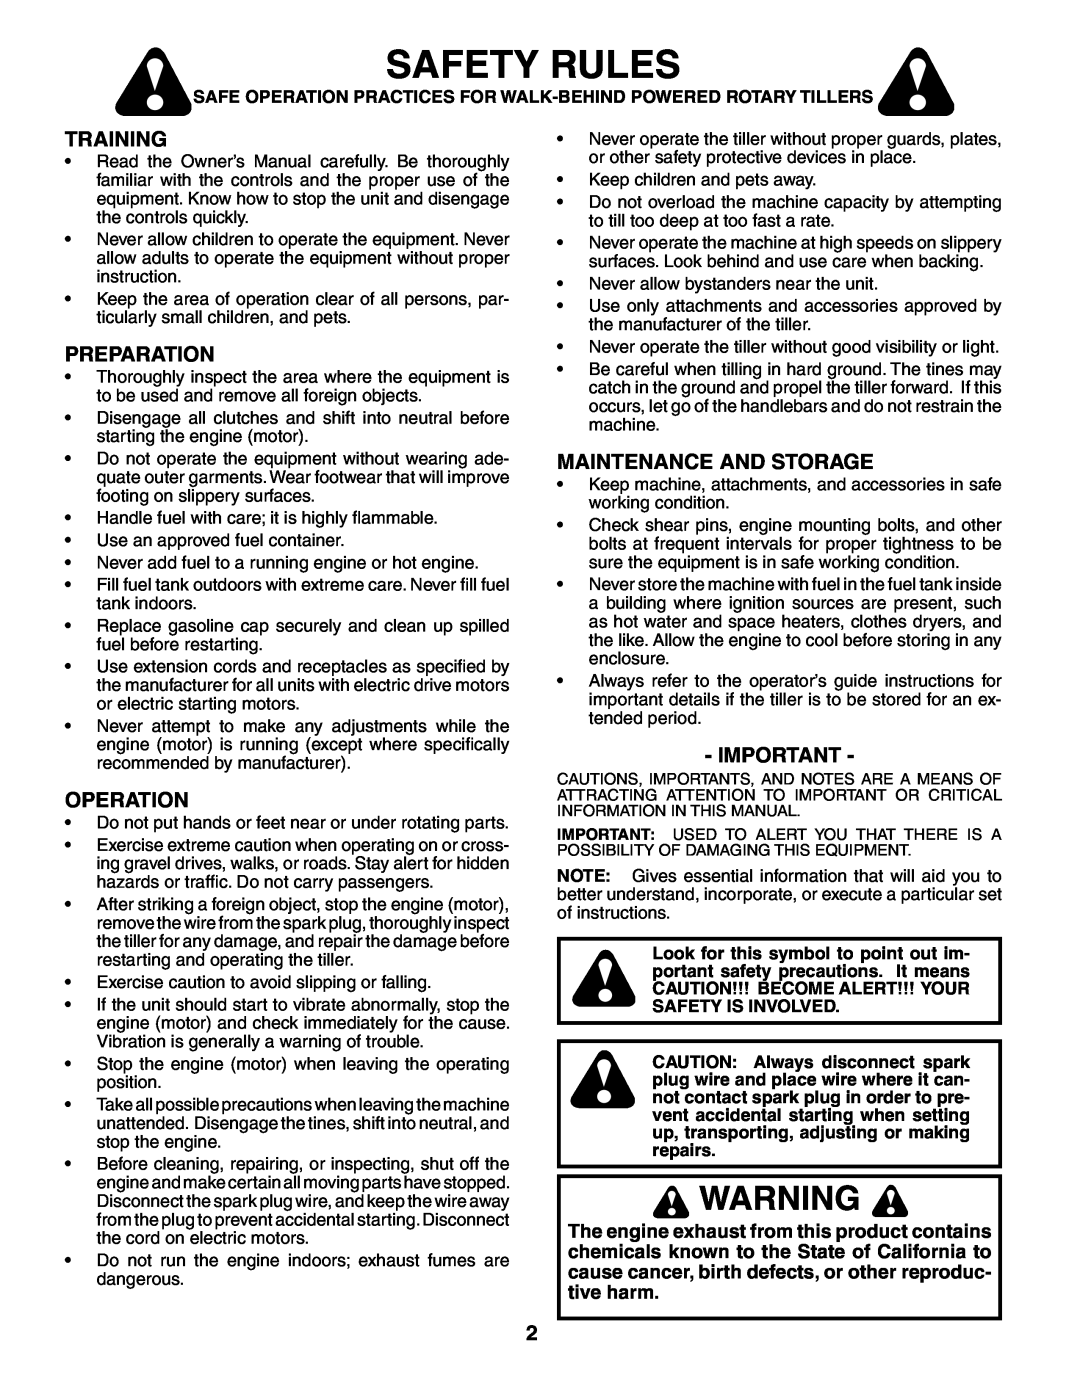 Poulan PRRT65B owner manual Safety Rules, Training, Preparation, Operation, Maintenance And Storage 